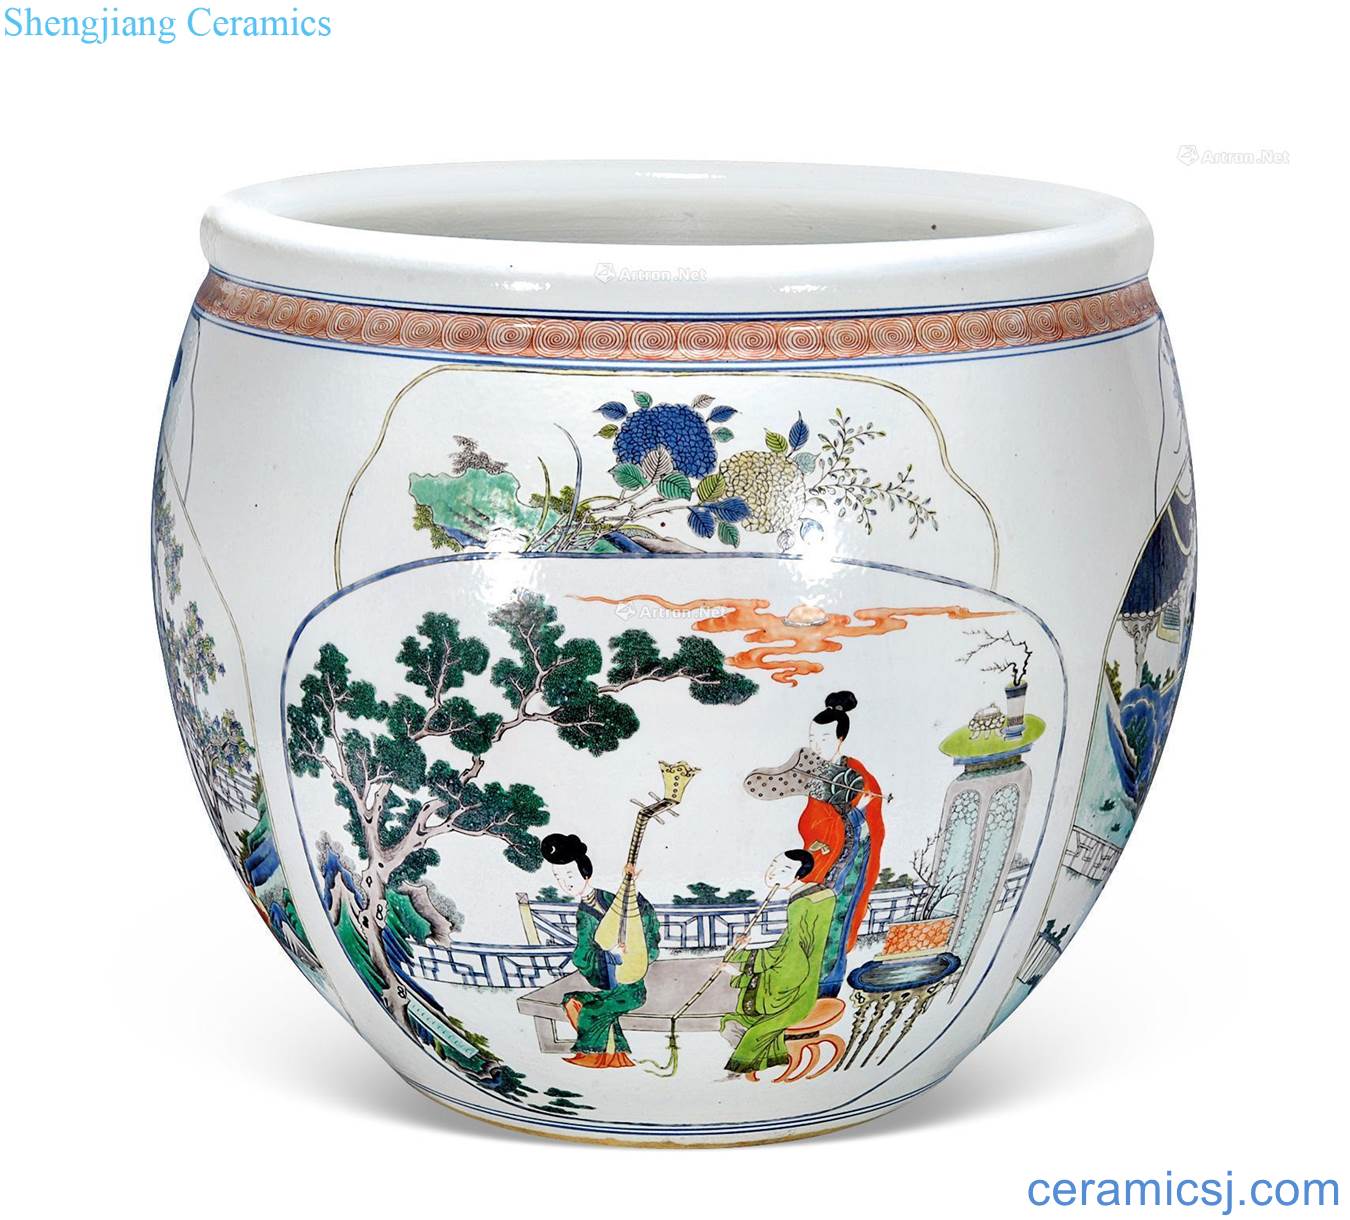 Qing daoguang Colorful stories of cylinder